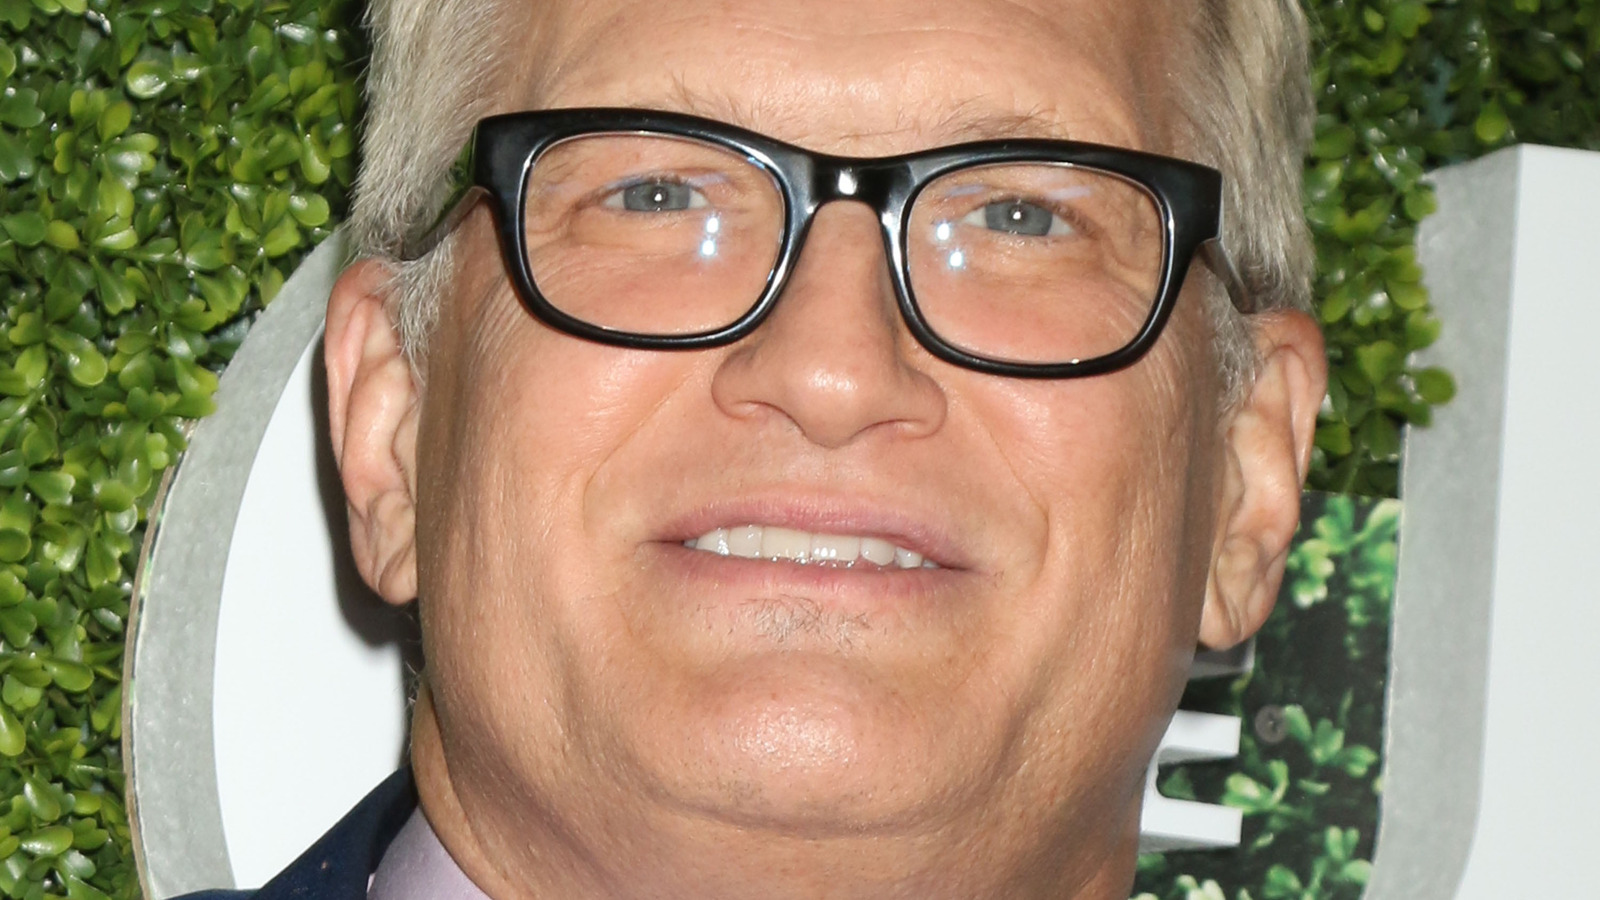 8. Drew Carey's Blonde Hair: A Look Back at His Most Iconic Hairstyles - wide 1